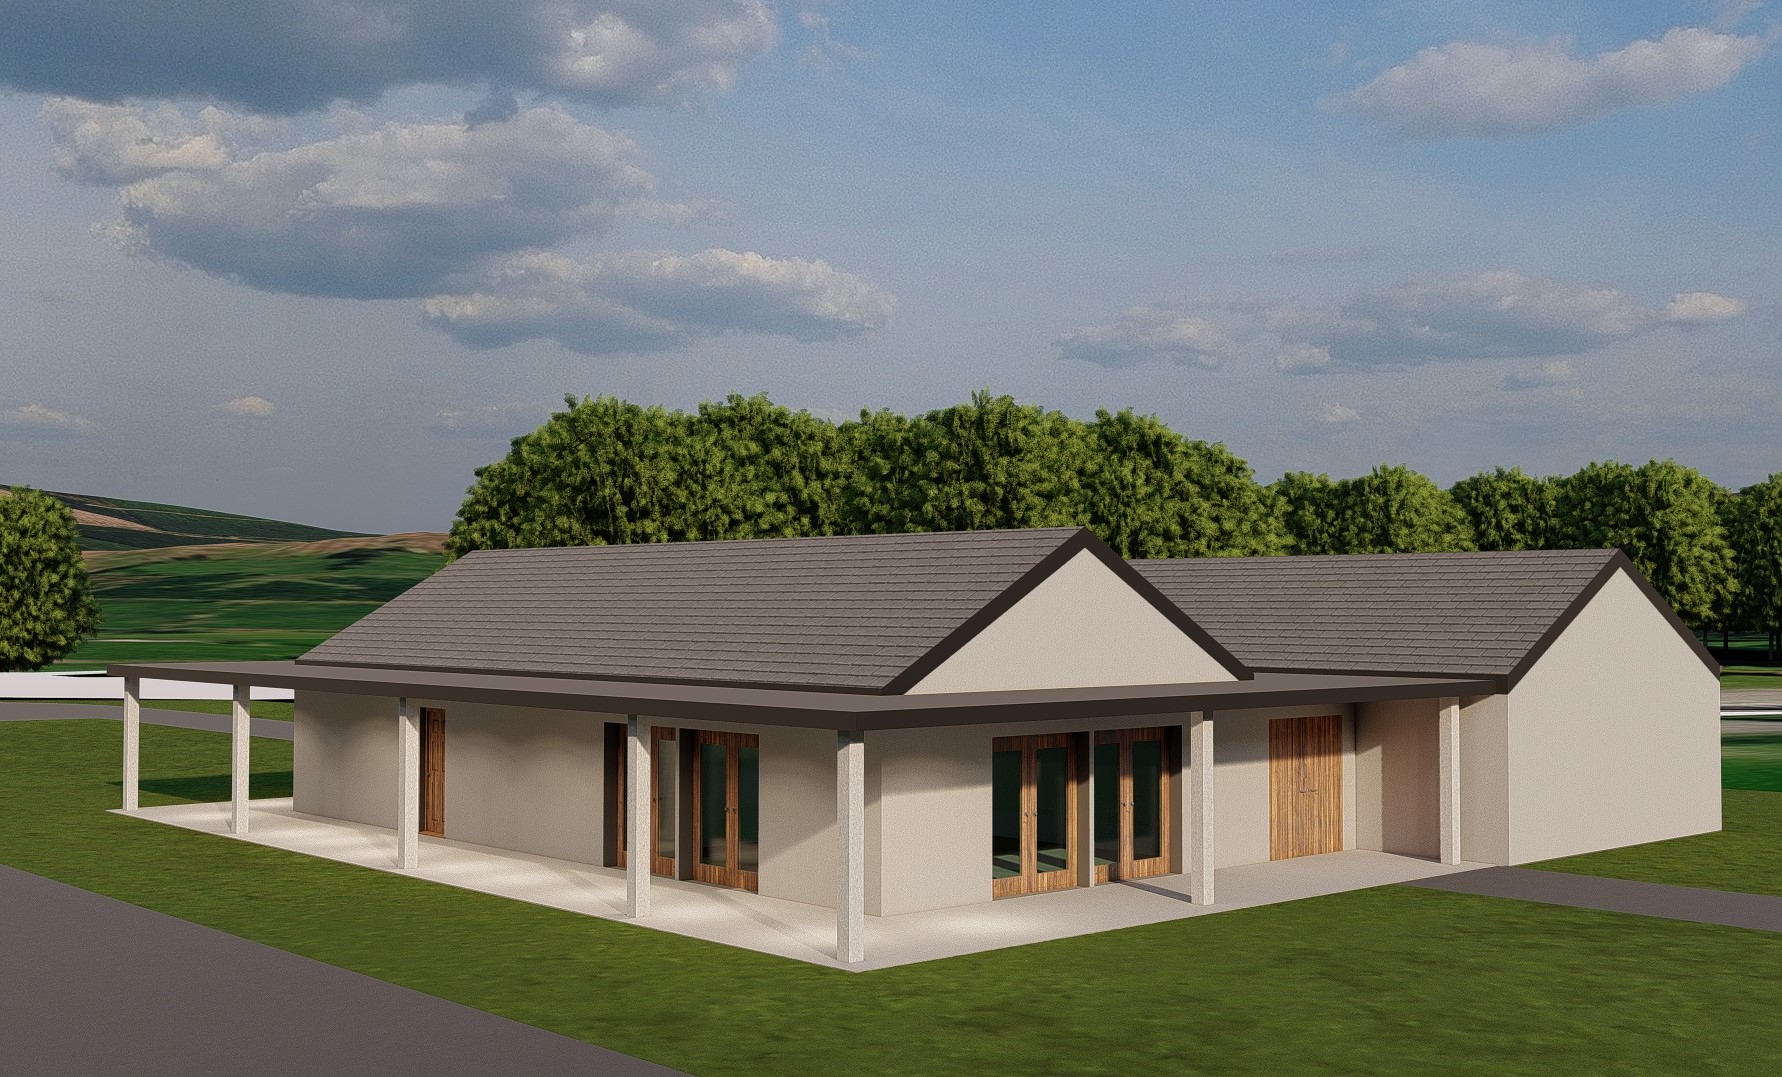 Groundbreaking…yes, it has arrived…the new Clubhouse turning of the sod ceremony is next Monday…All Welcome